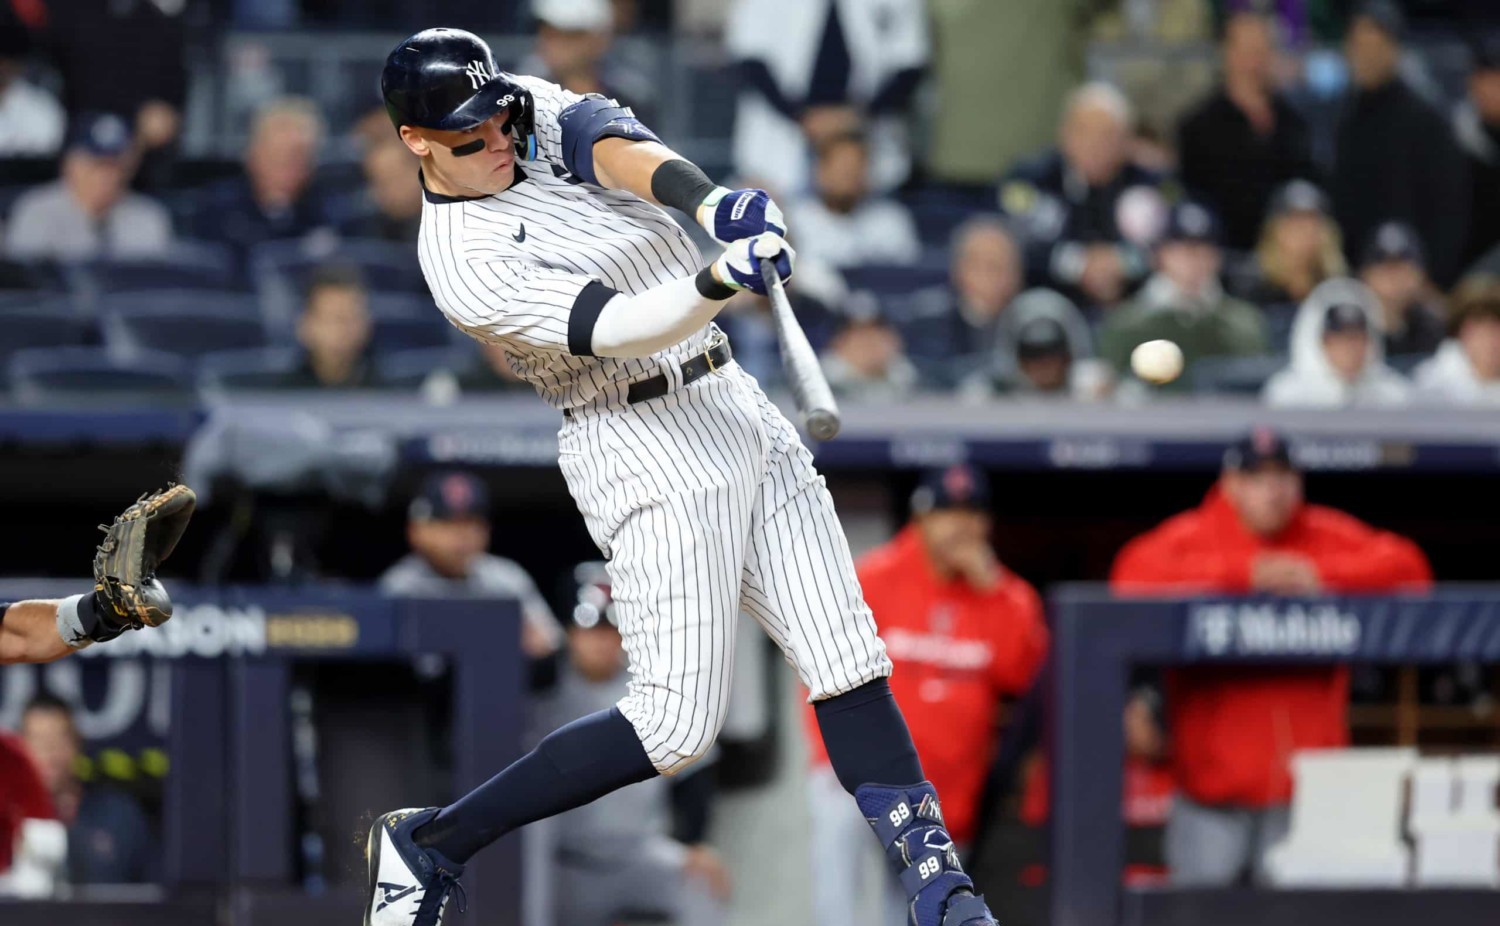 If Yankees' Aaron Judge signs with Giants, it's never been about winning